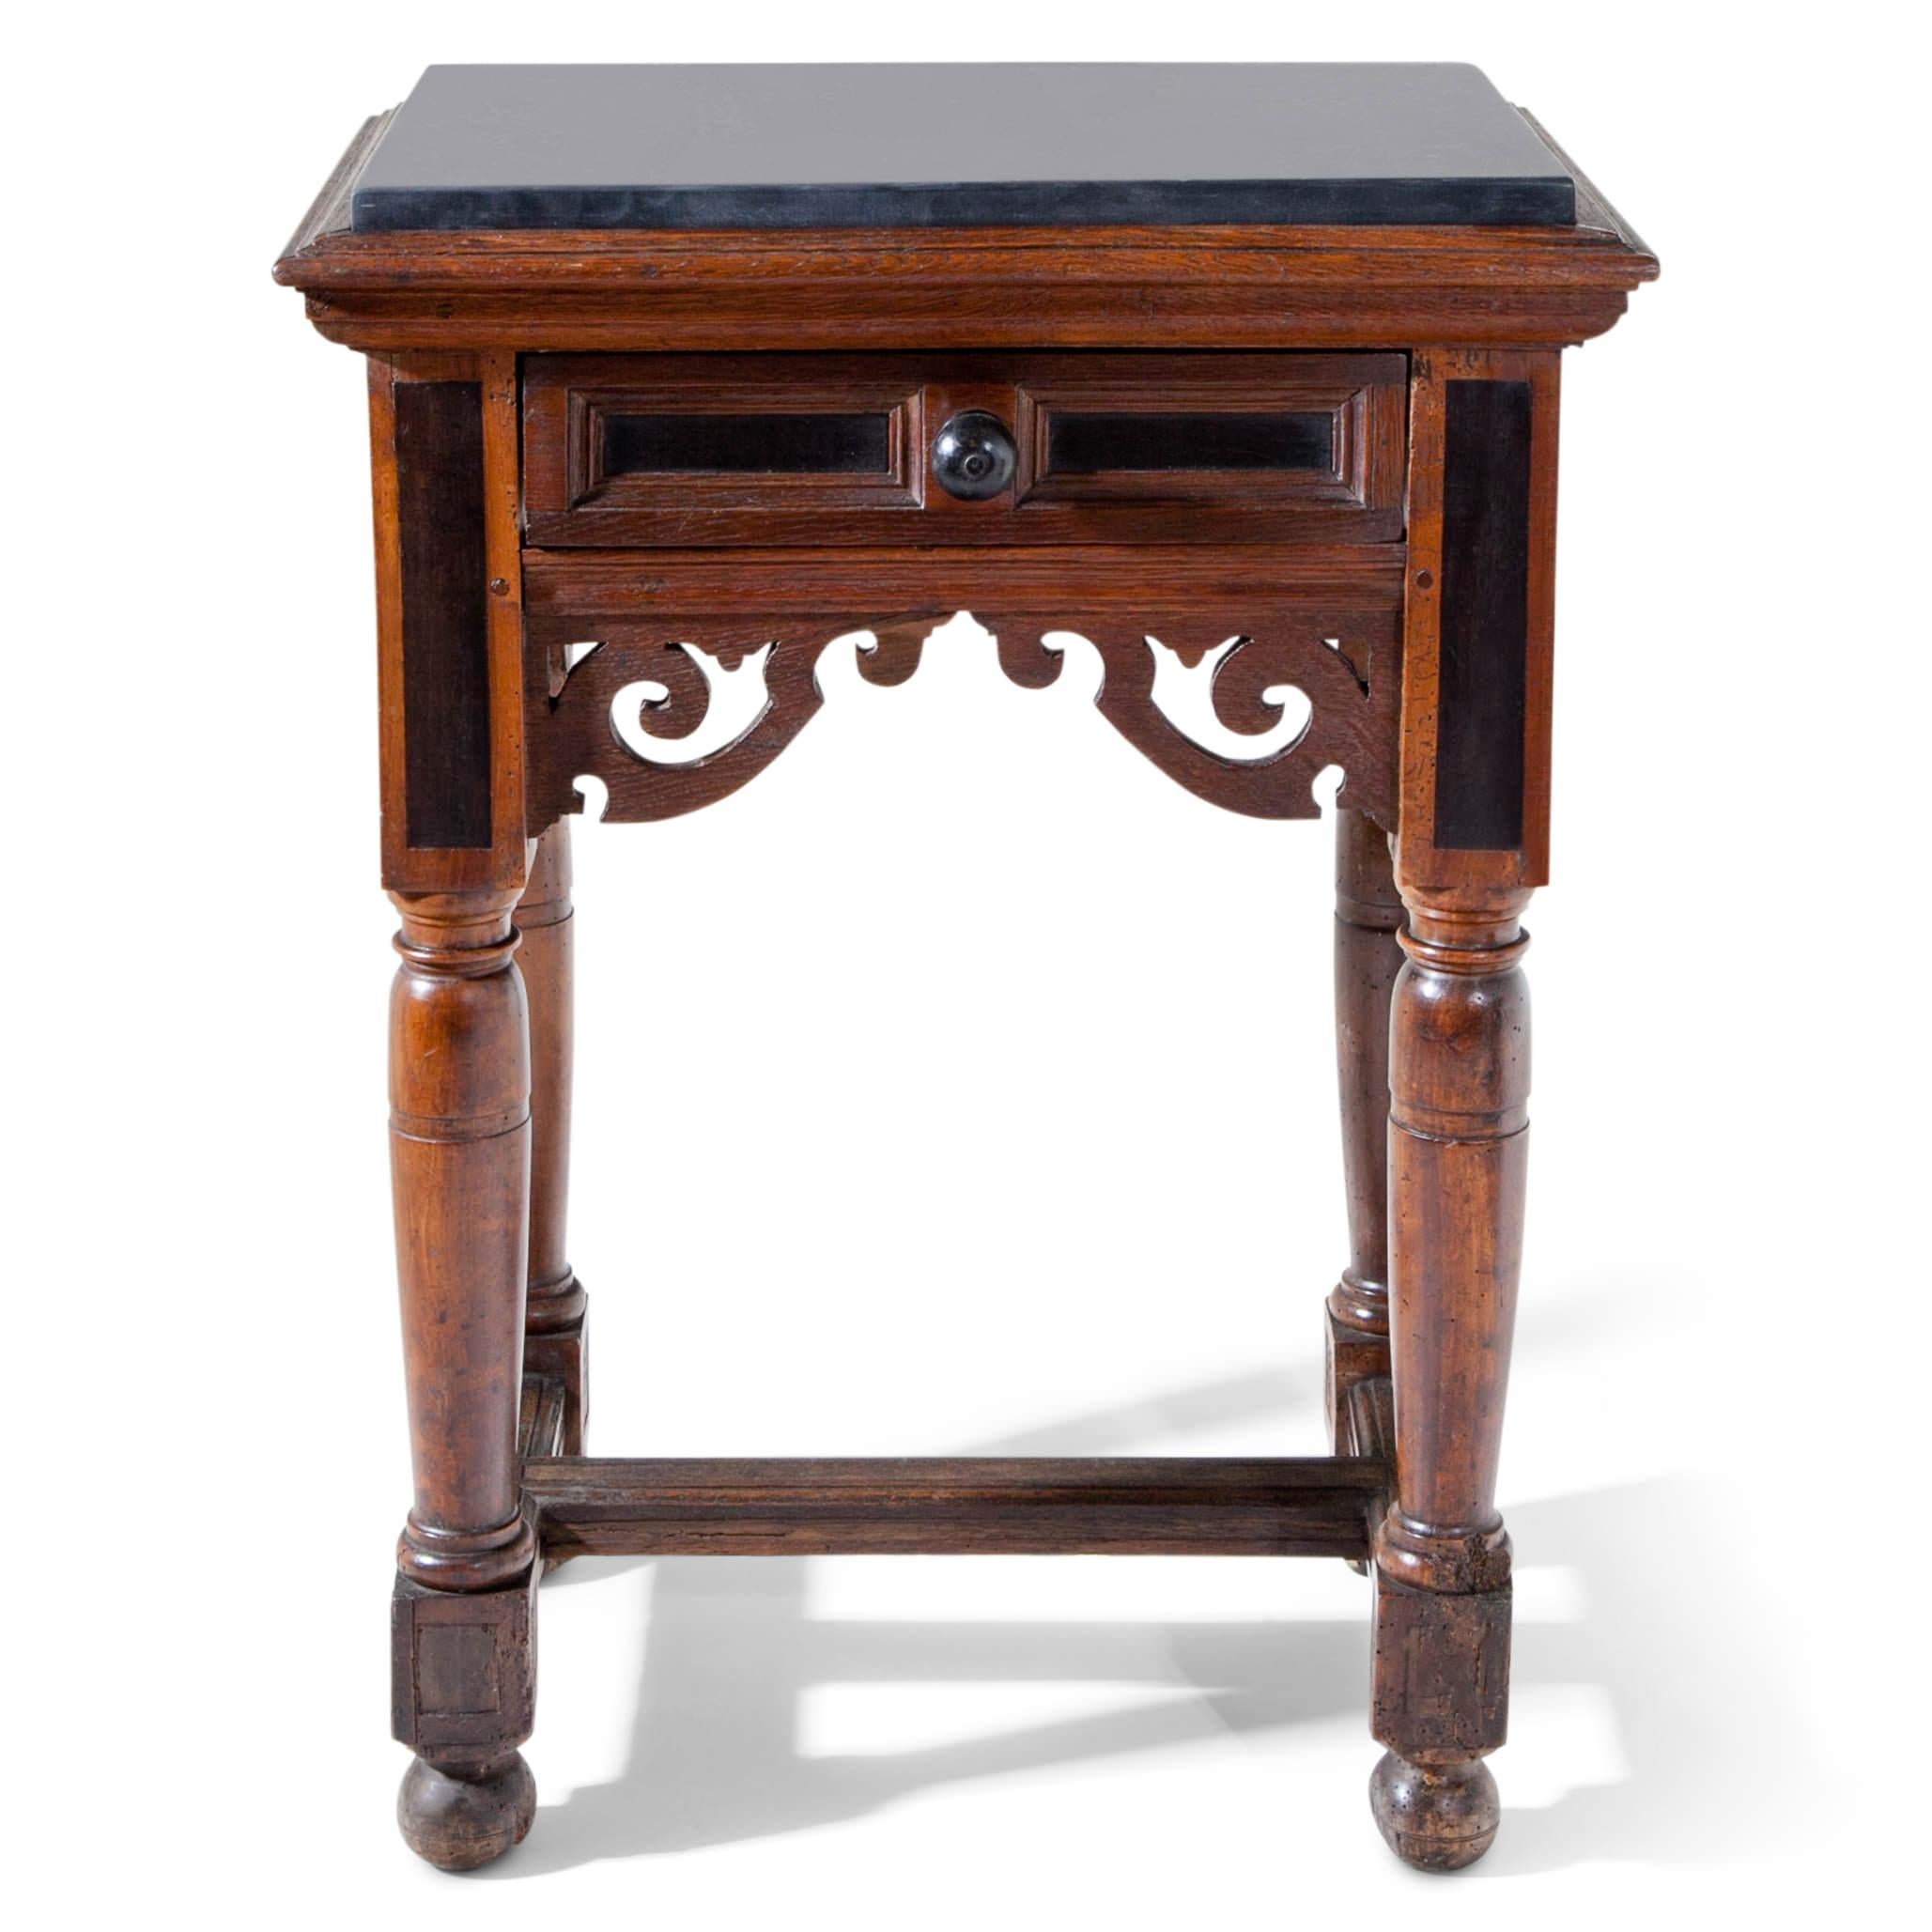 Small side table with one drawer out of oak, standing on four baluster legs with ball feet and a double-T strutting. The tabletop is covered with a black marble plate. Drawer and legs are partly ebonized. Unrestored condition.